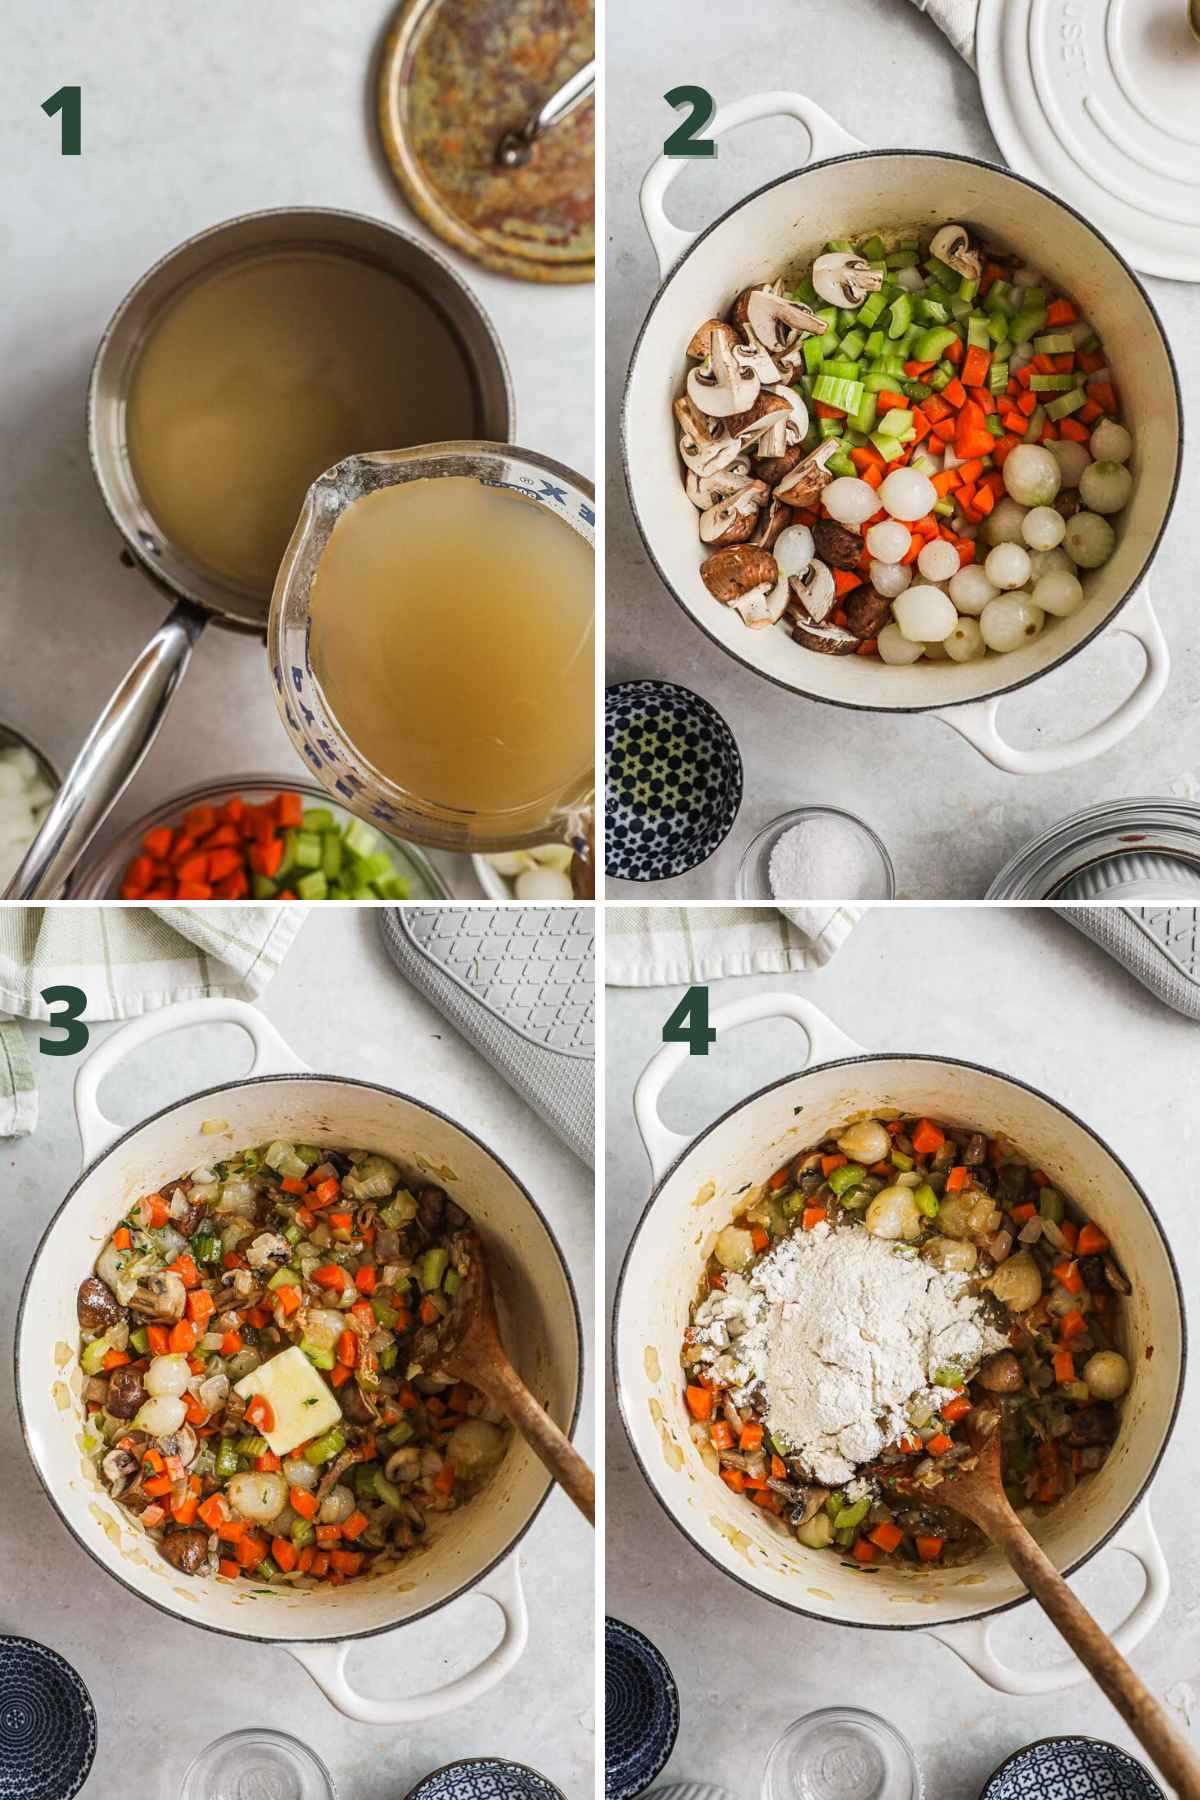 Steps to make vegetarian pot pie, heat vegetable stock in a saucepan, saute vegetables, add butter and flour to make roux.